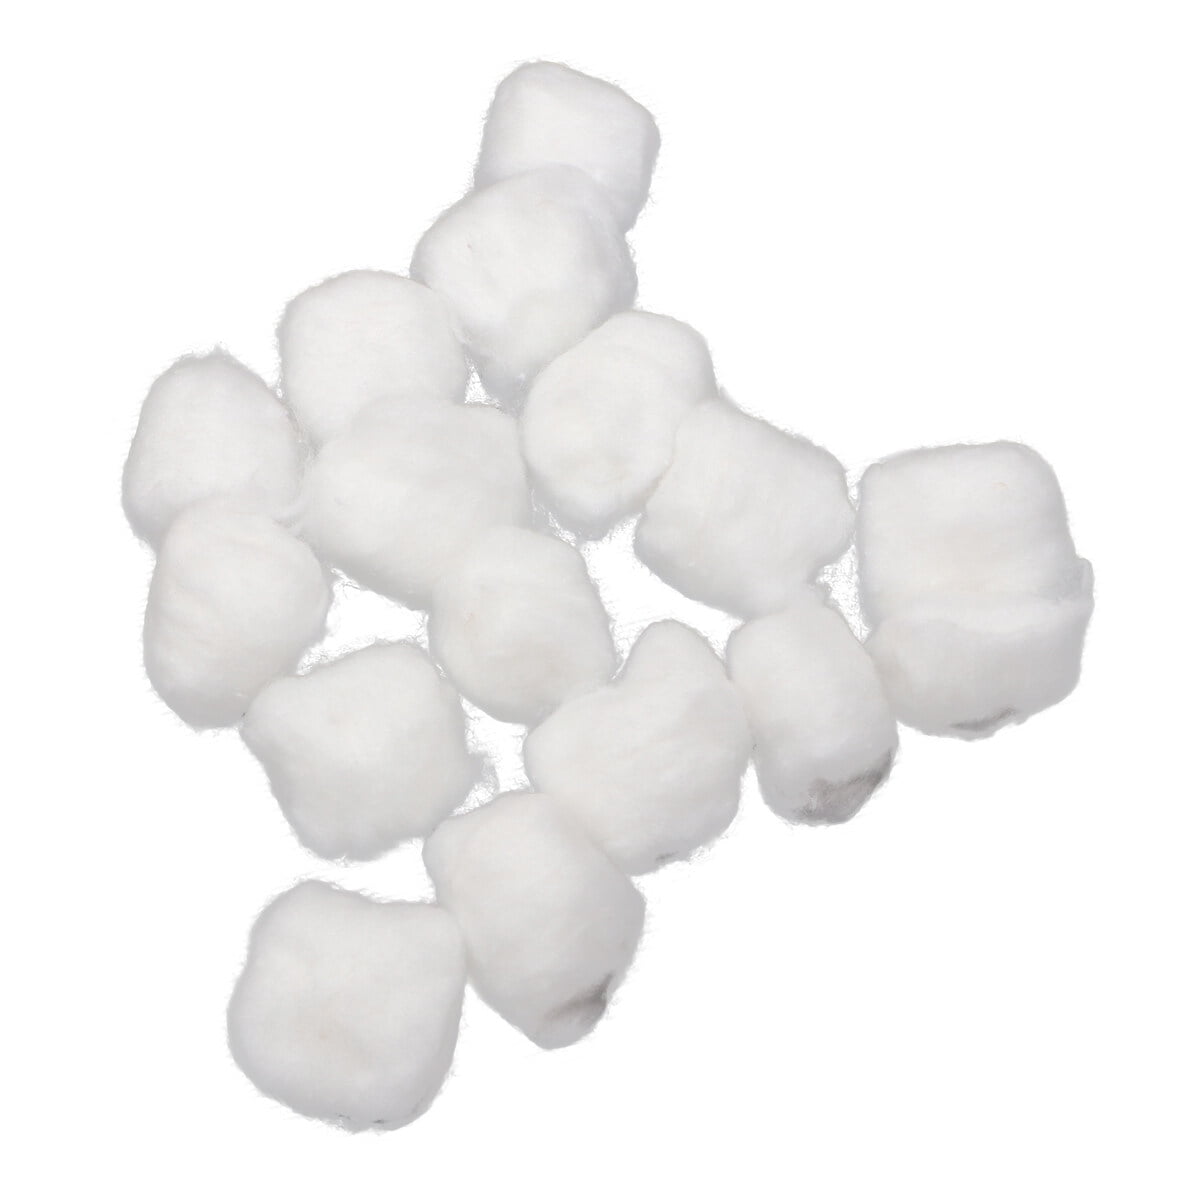 DecorRack 600 Small Cotton Balls for Make-Up, Nail Polish Removal, Pet  Care, Applying Oil Lotion or Powder, Made from 100% Natural Cotton, Soft  and